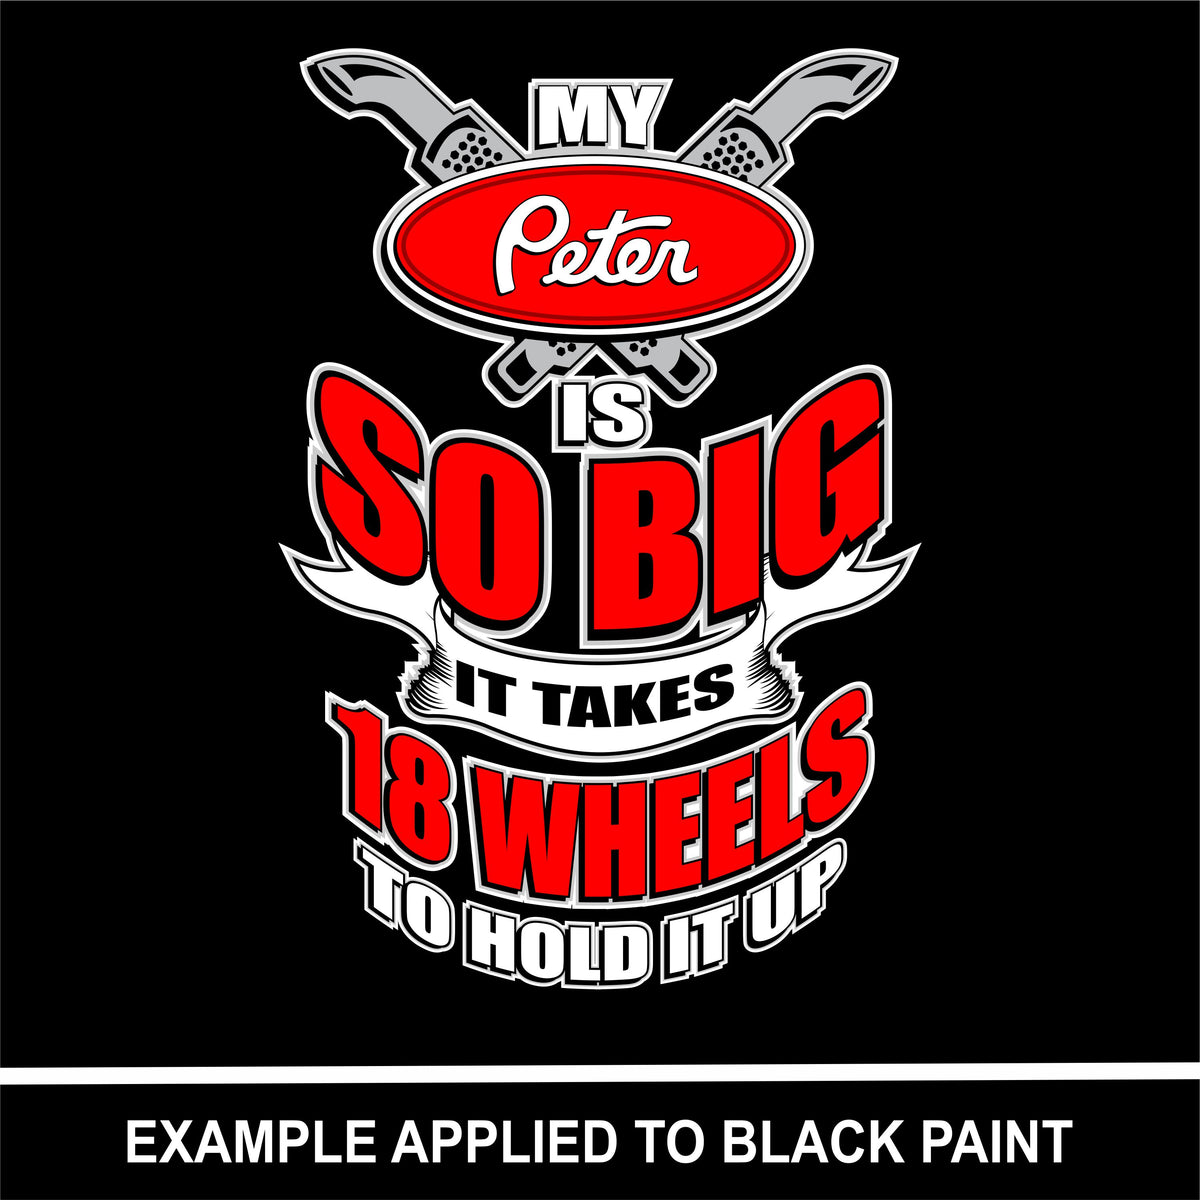 My Peter is So Big - Full Color Vinyl Decal - Free Shipping